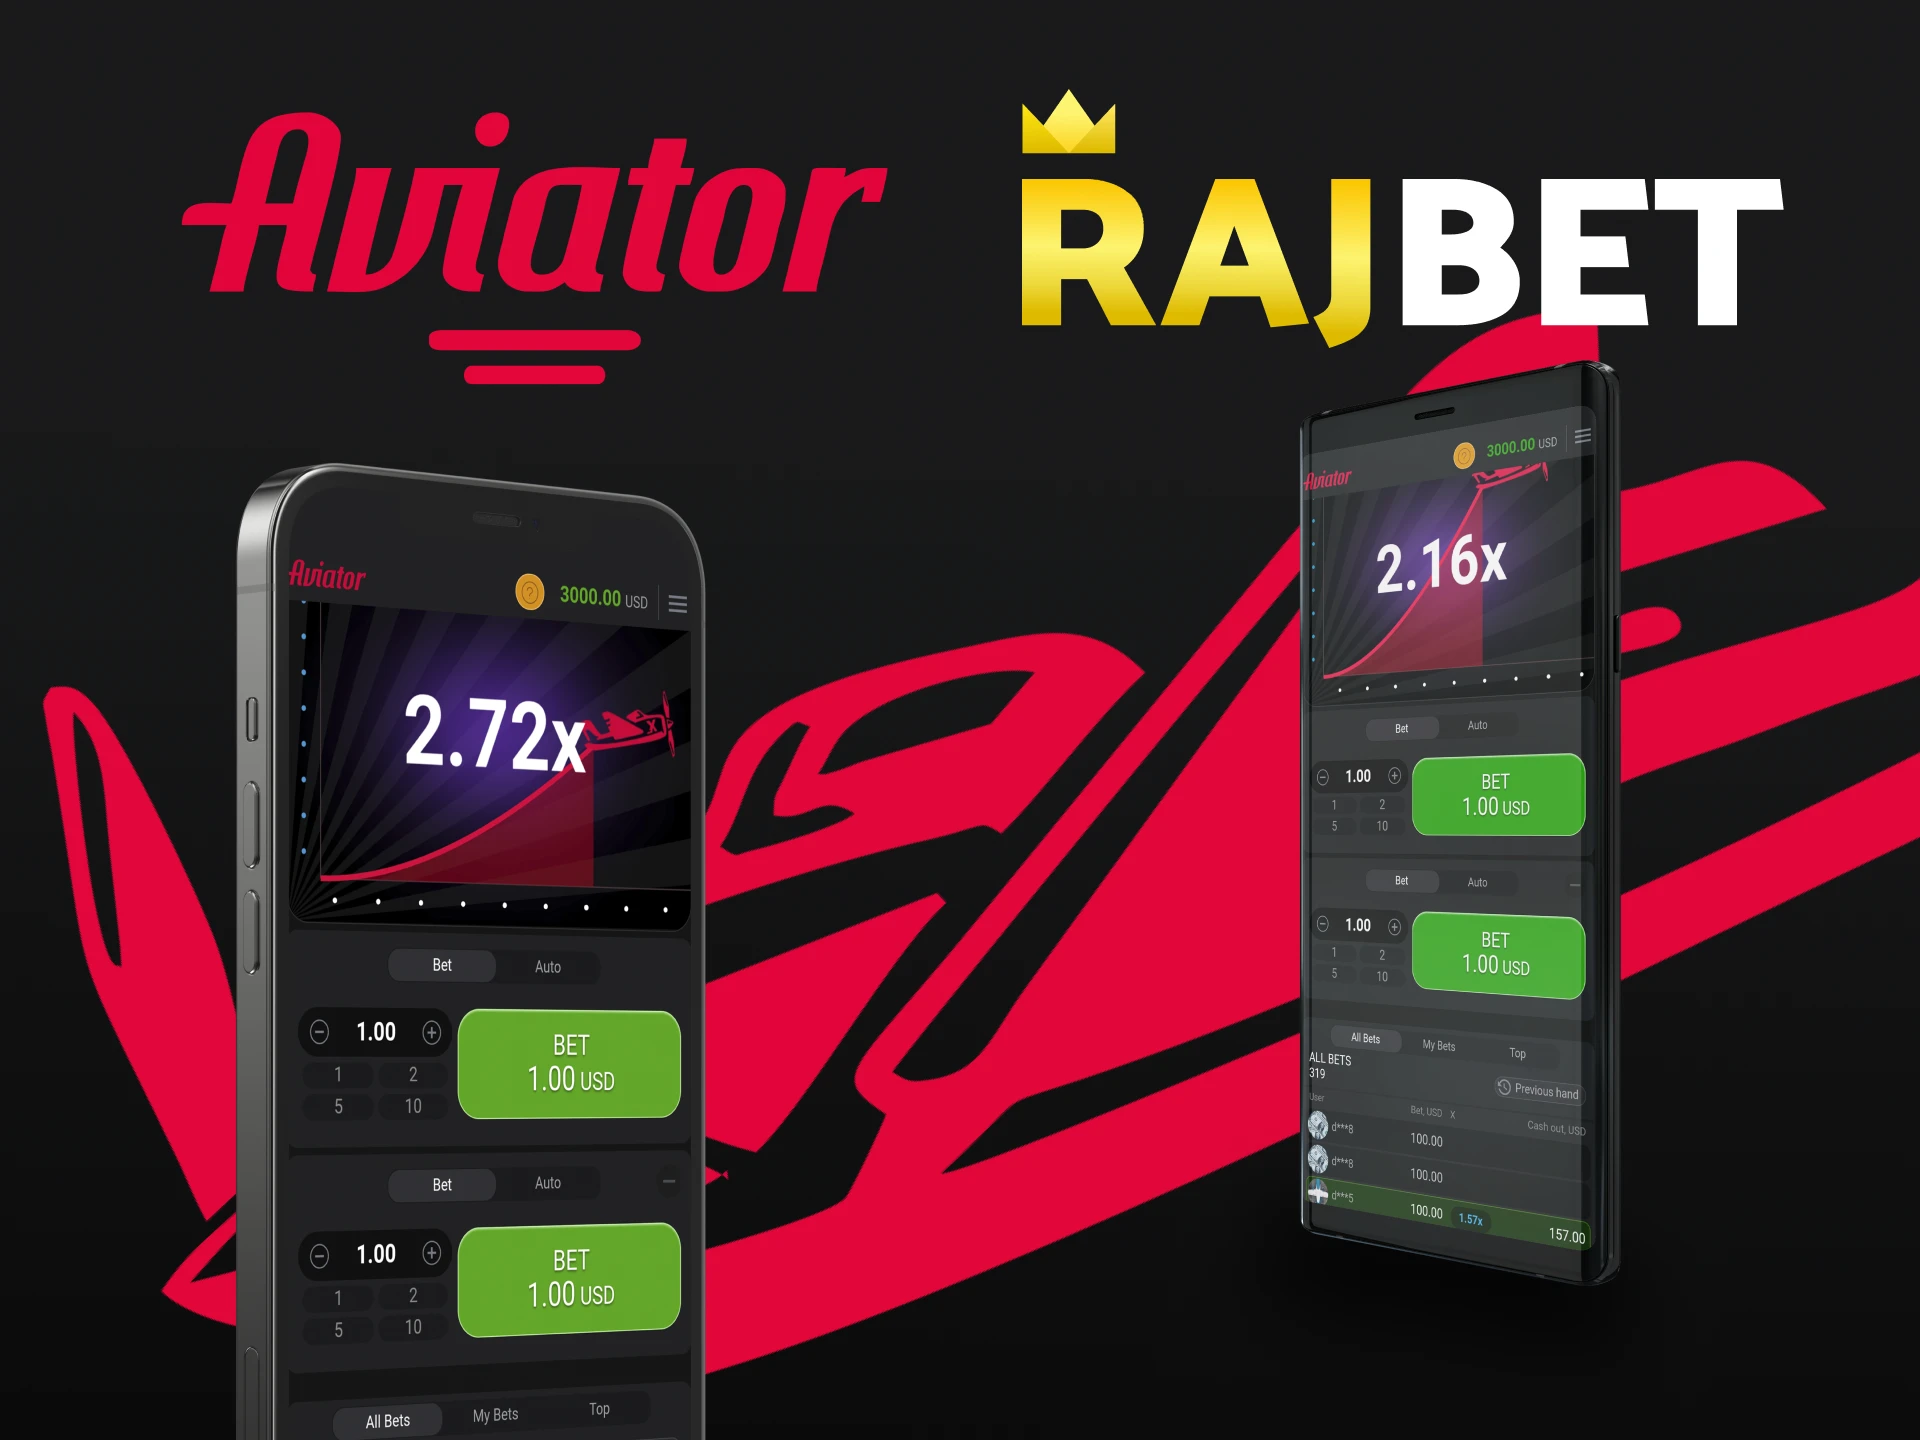 Find out on which device is better to play Aviator through the Rajbet application.